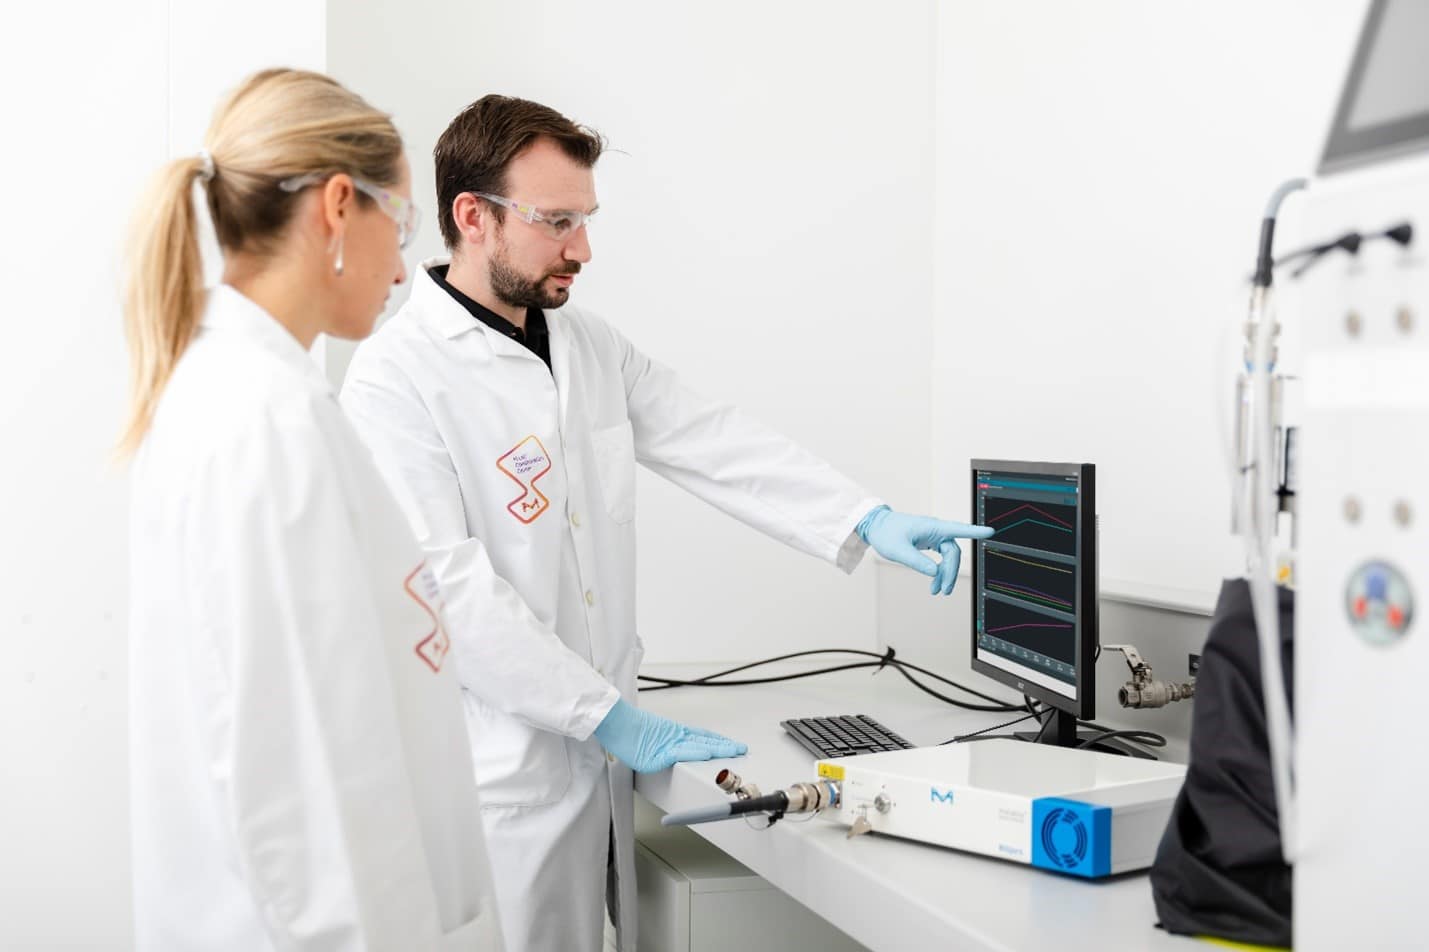 Two operators in a lab operating a Raman system and analyzing the data from their bioprocess activities.